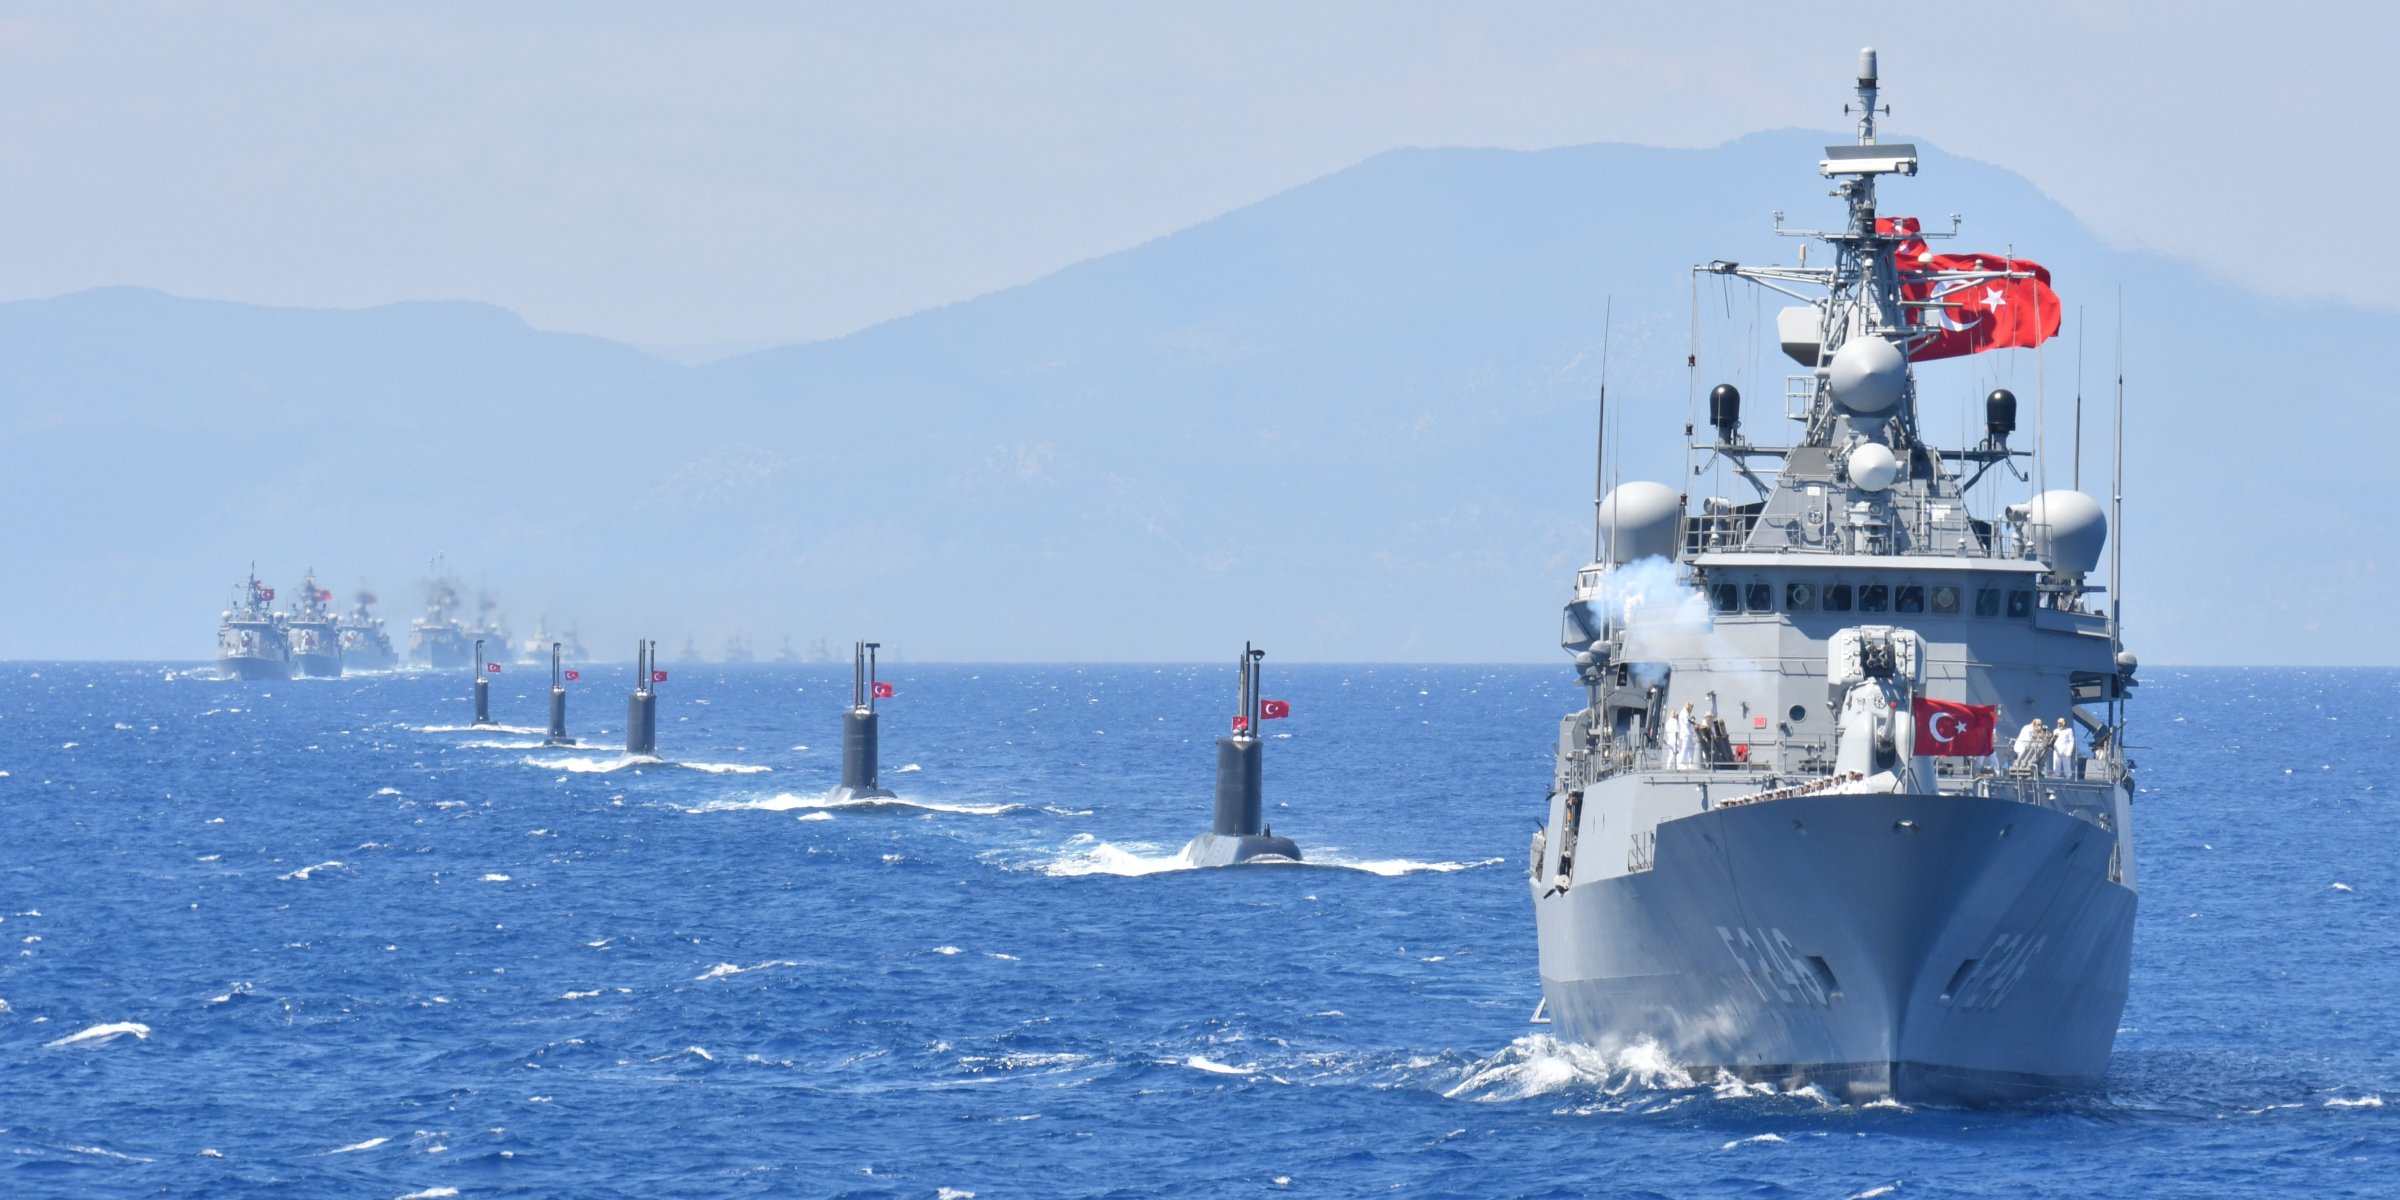 New provocation: Turkey staging naval drills in Aegean Sea